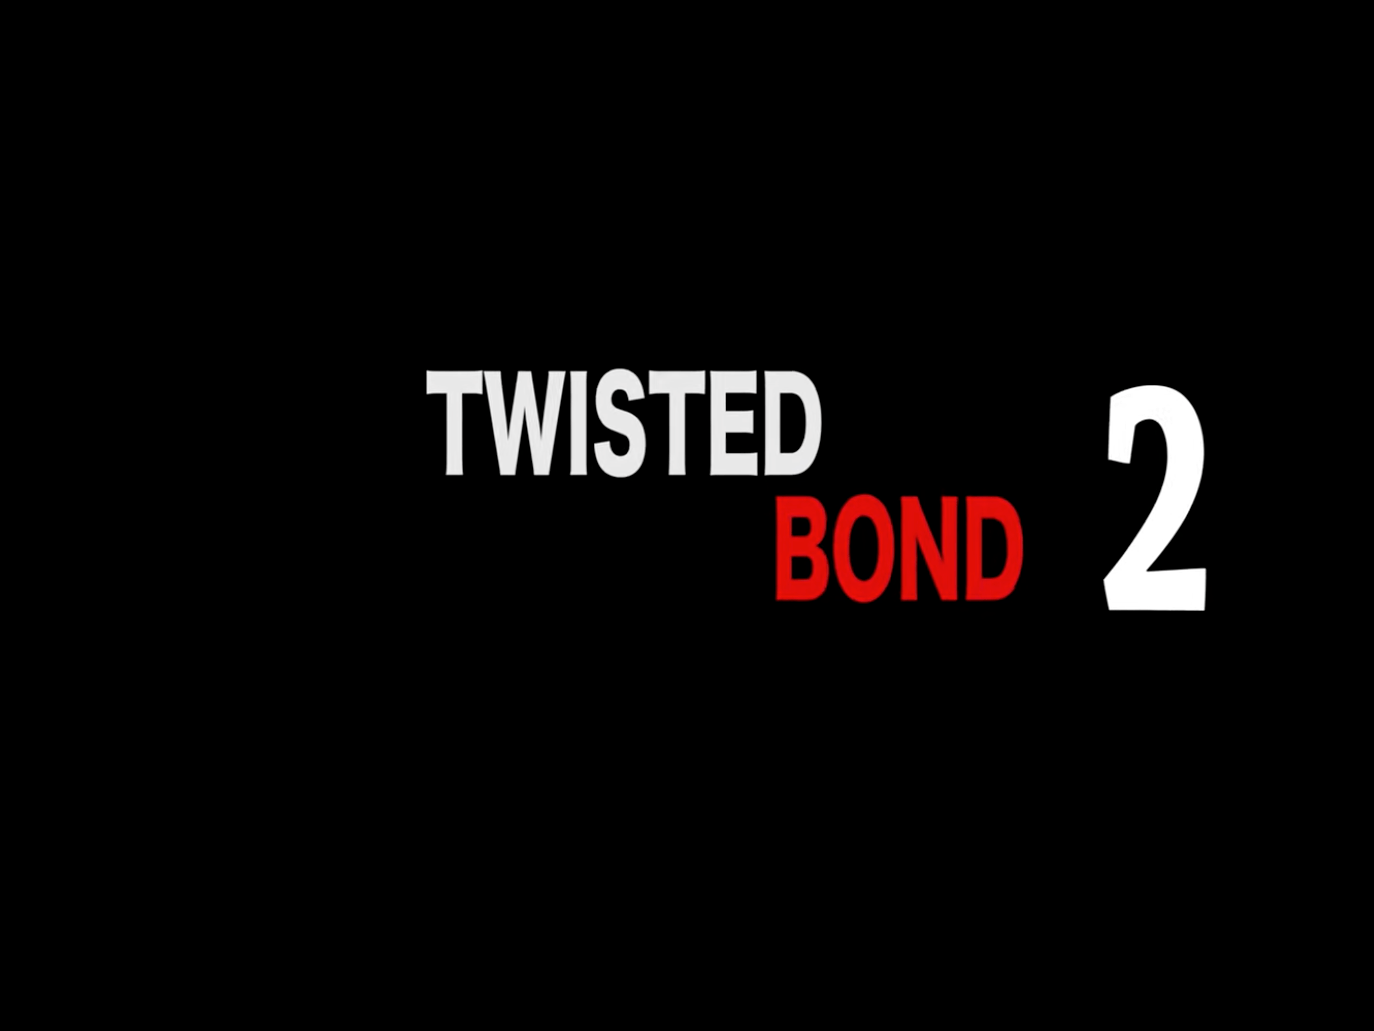 TWISTED BOND 2 NollywoodGuide.us